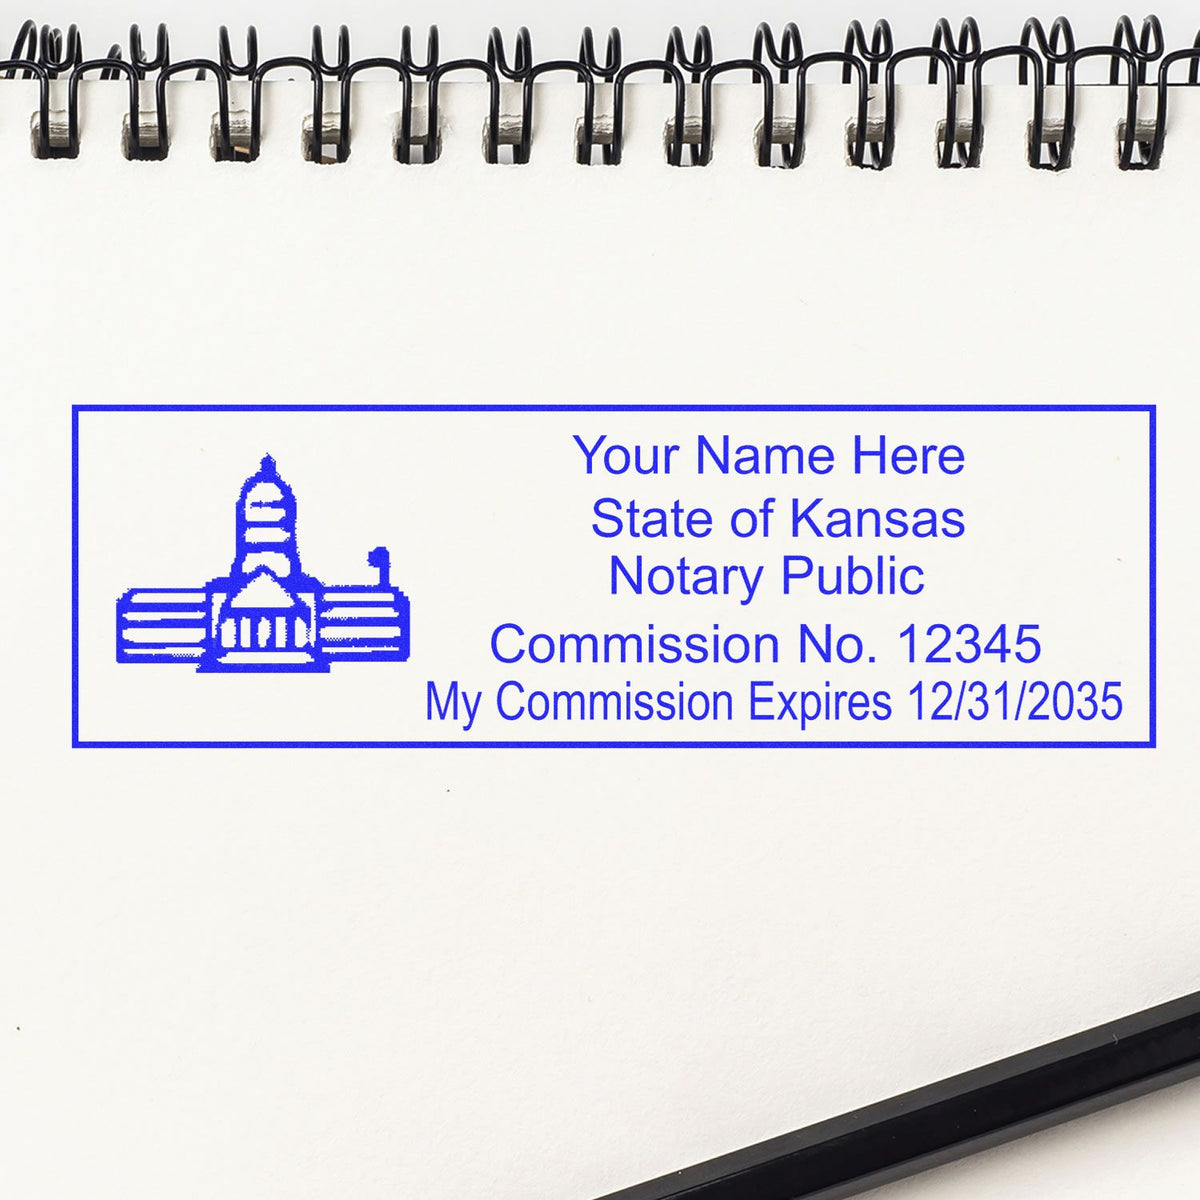 An alternative view of the Super Slim Kansas Notary Public Stamp stamped on a sheet of paper showing the image in use